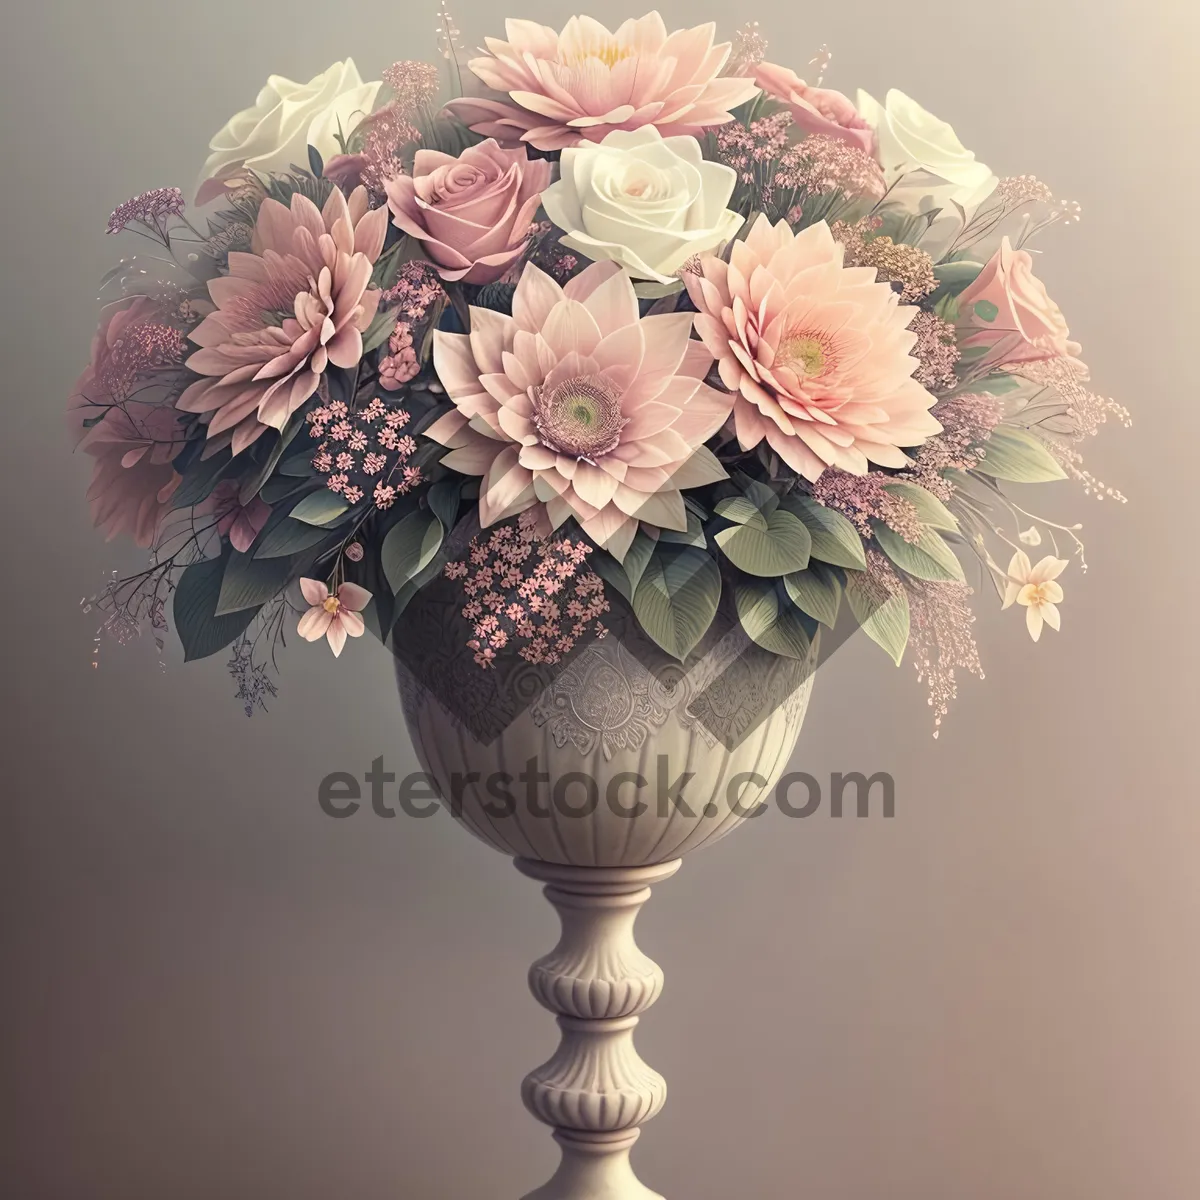 Picture of Exquisite Pink Floral Arrangement with Glass Goblet